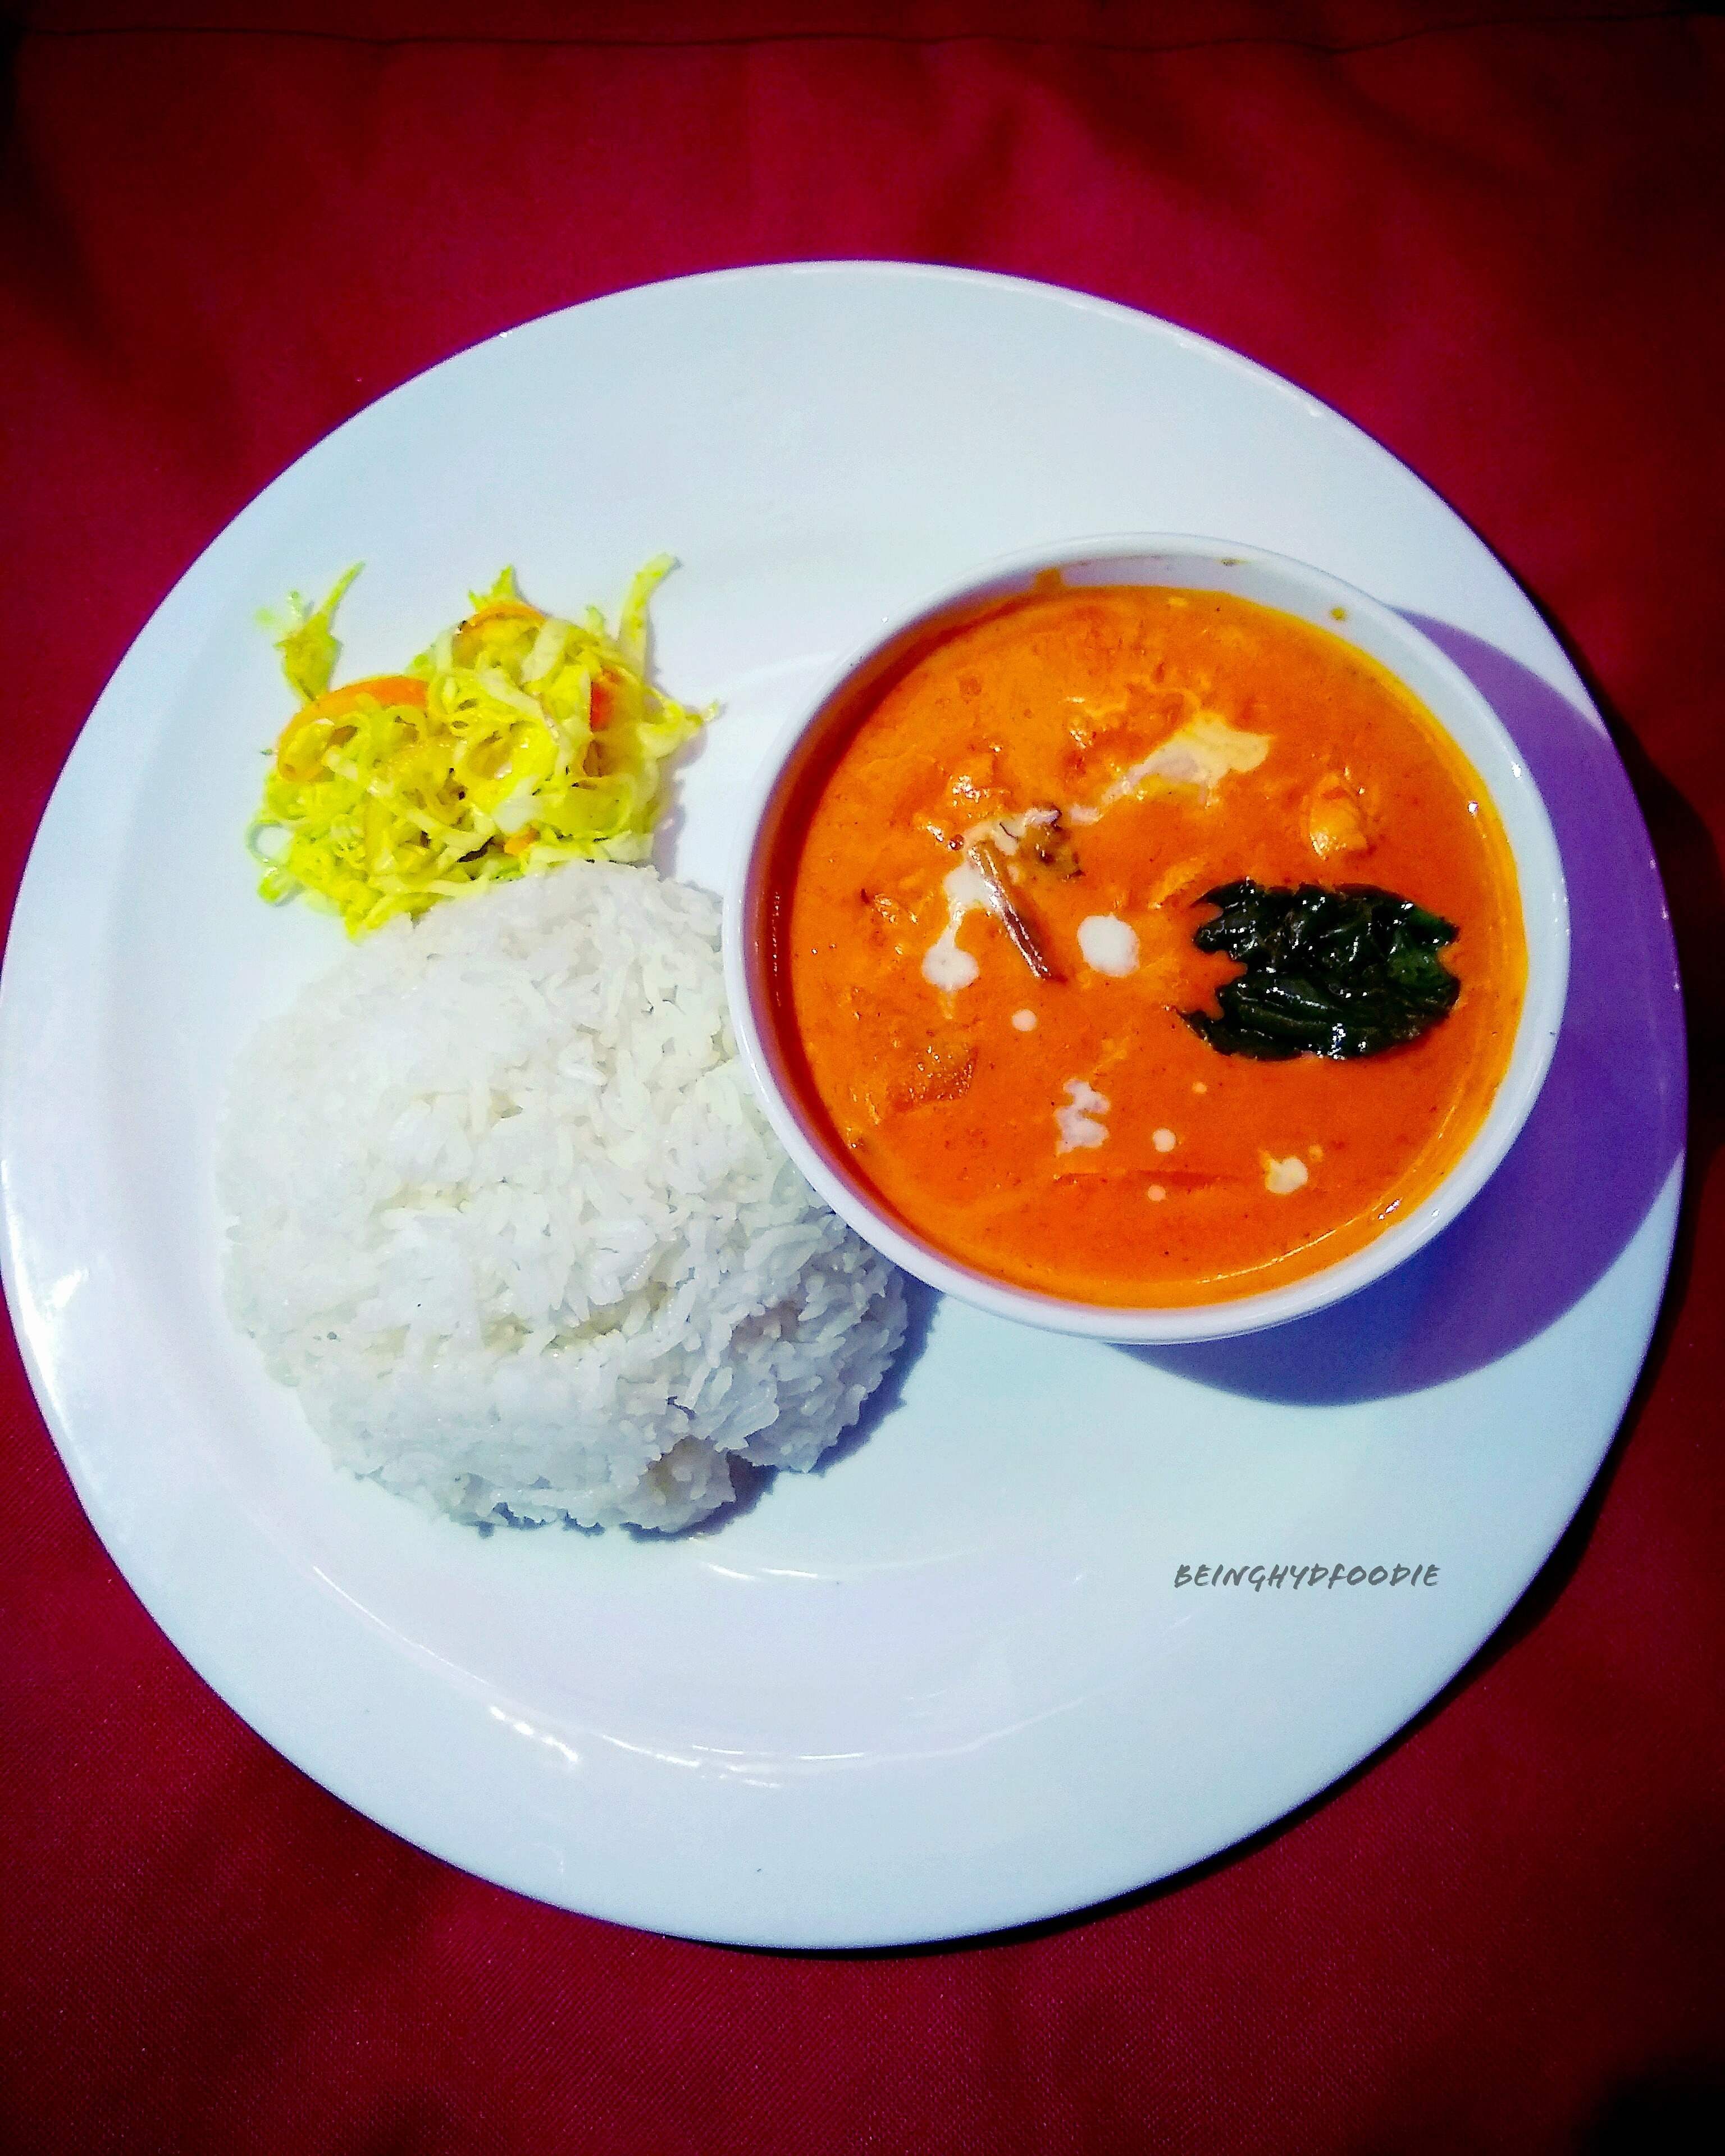 Dish,Food,Cuisine,Ingredient,Steamed rice,Curry,White rice,Produce,Red curry,Japanese curry